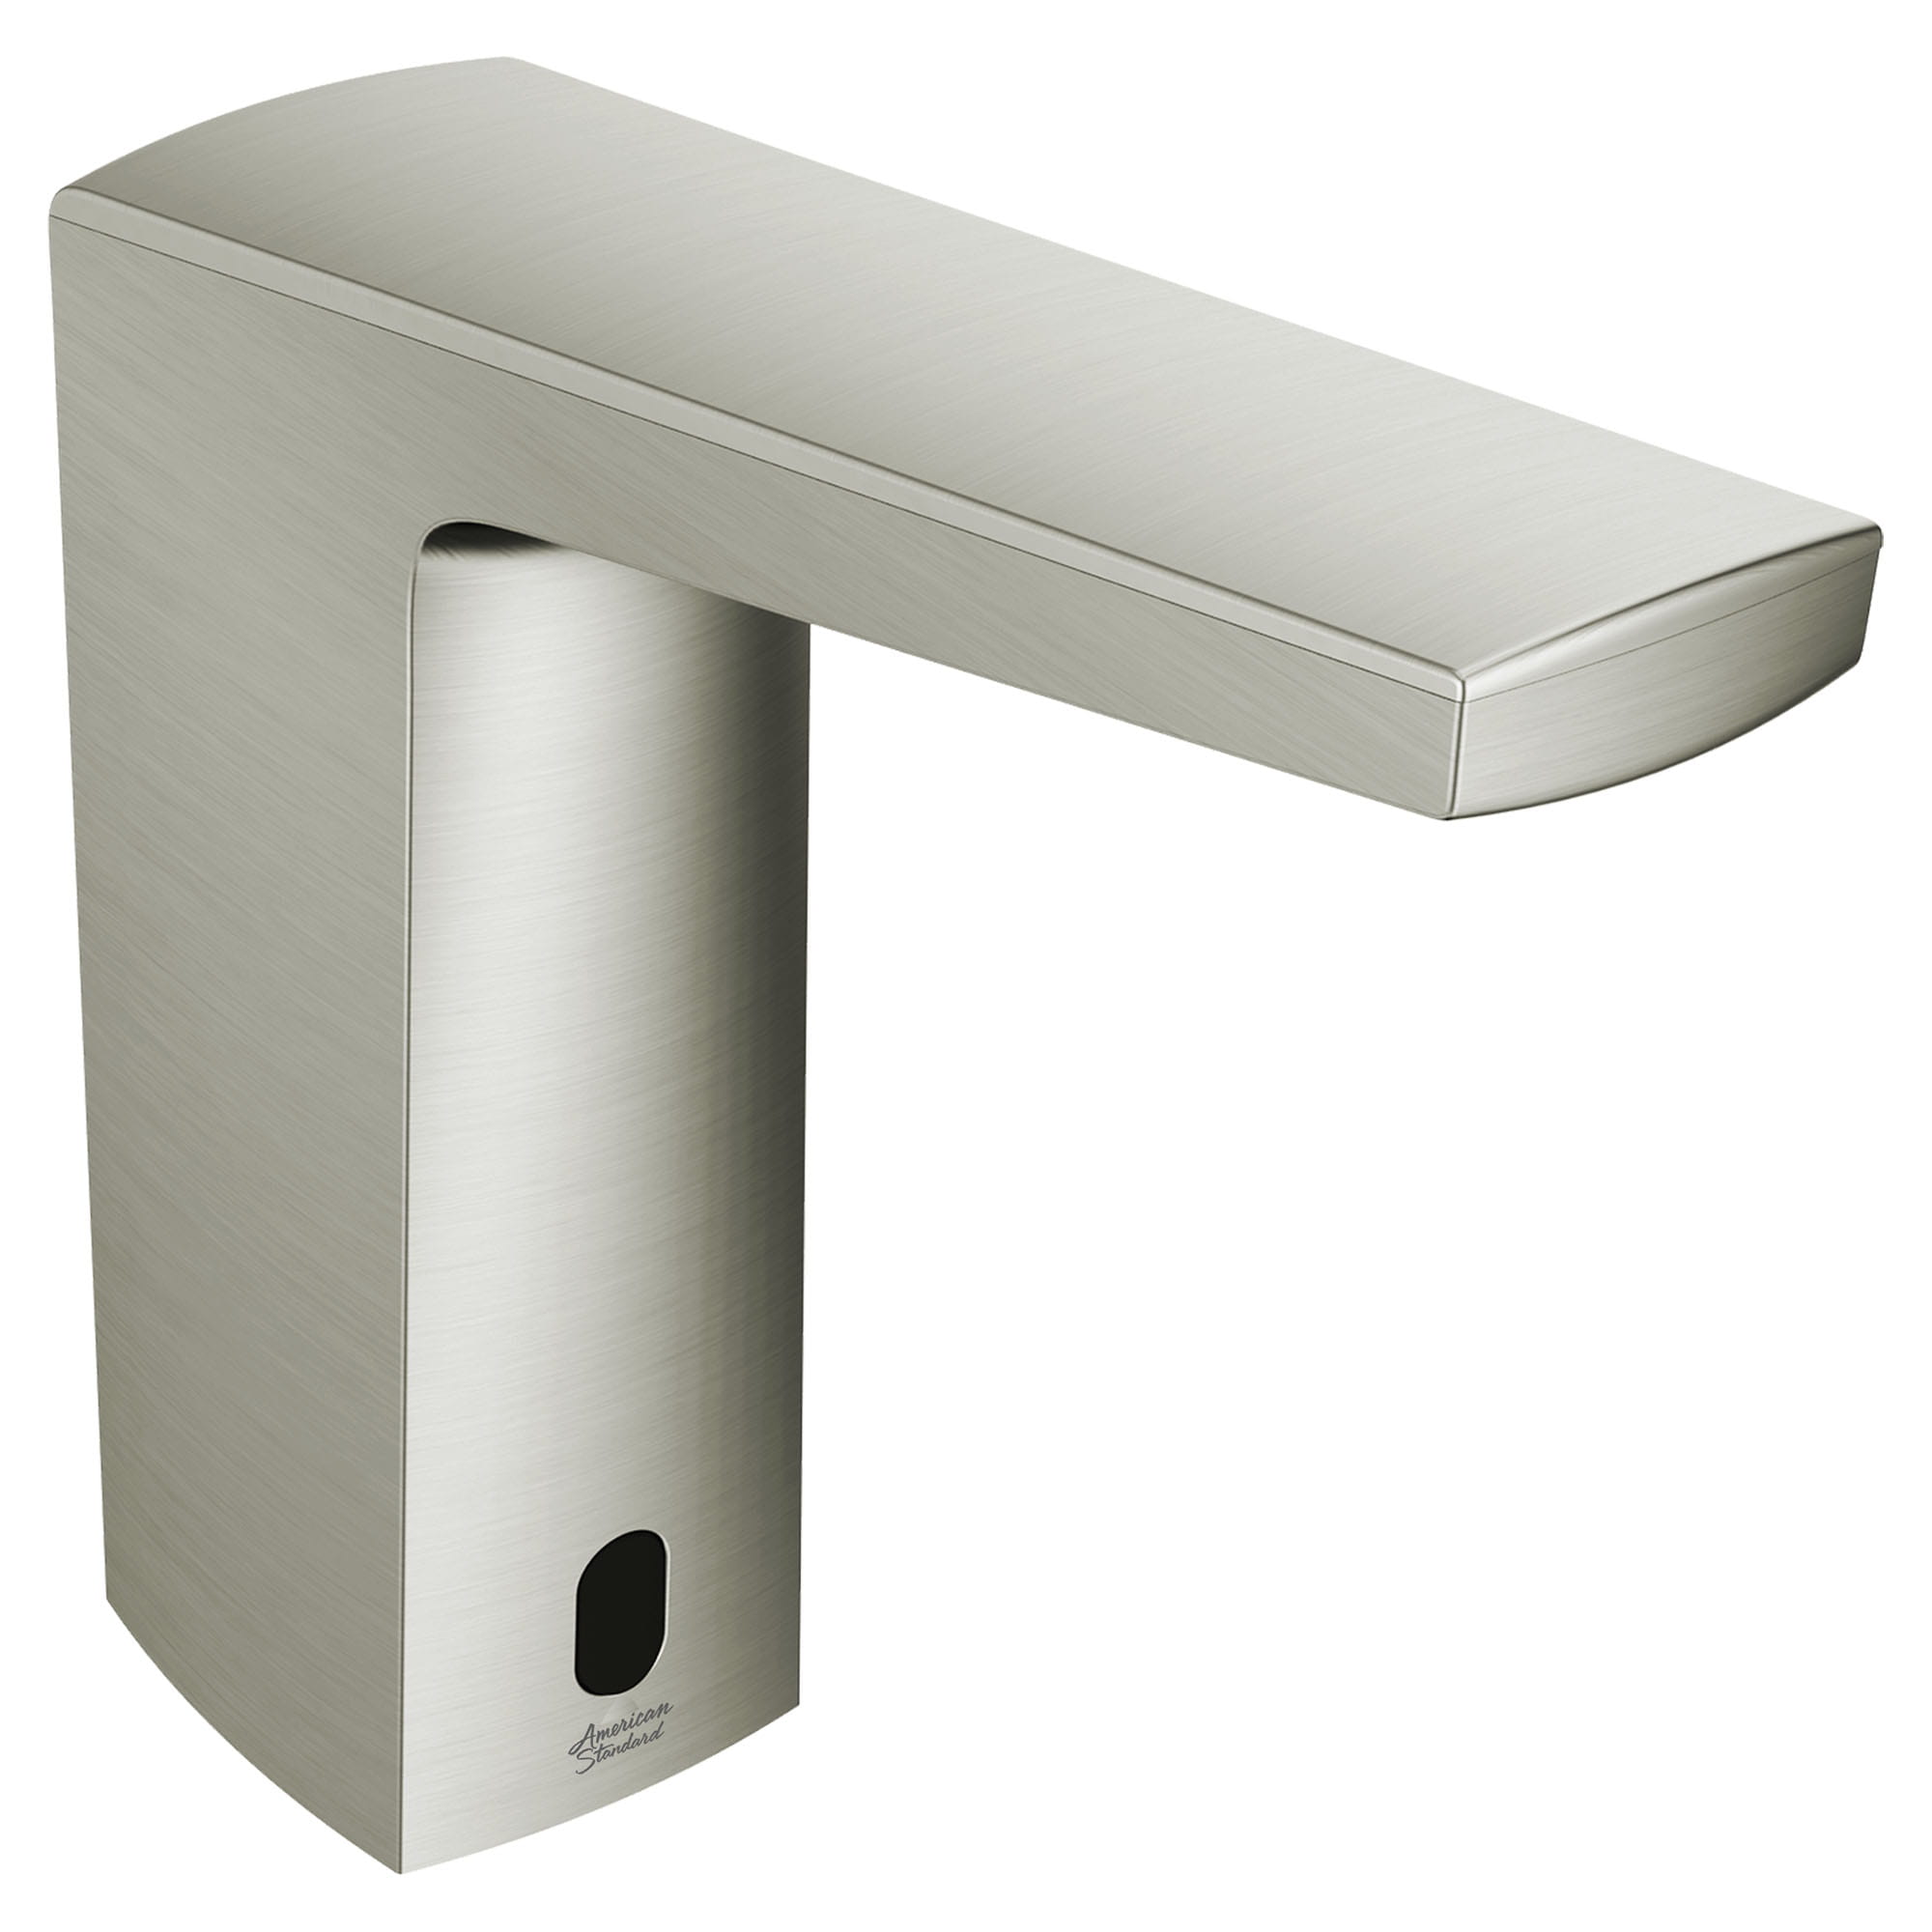 Paradigm Selectronic Touchless Faucet Battery Powered With Above Deck Mixing 035 gpm 13 Lpm   BRUSHED NICKEL